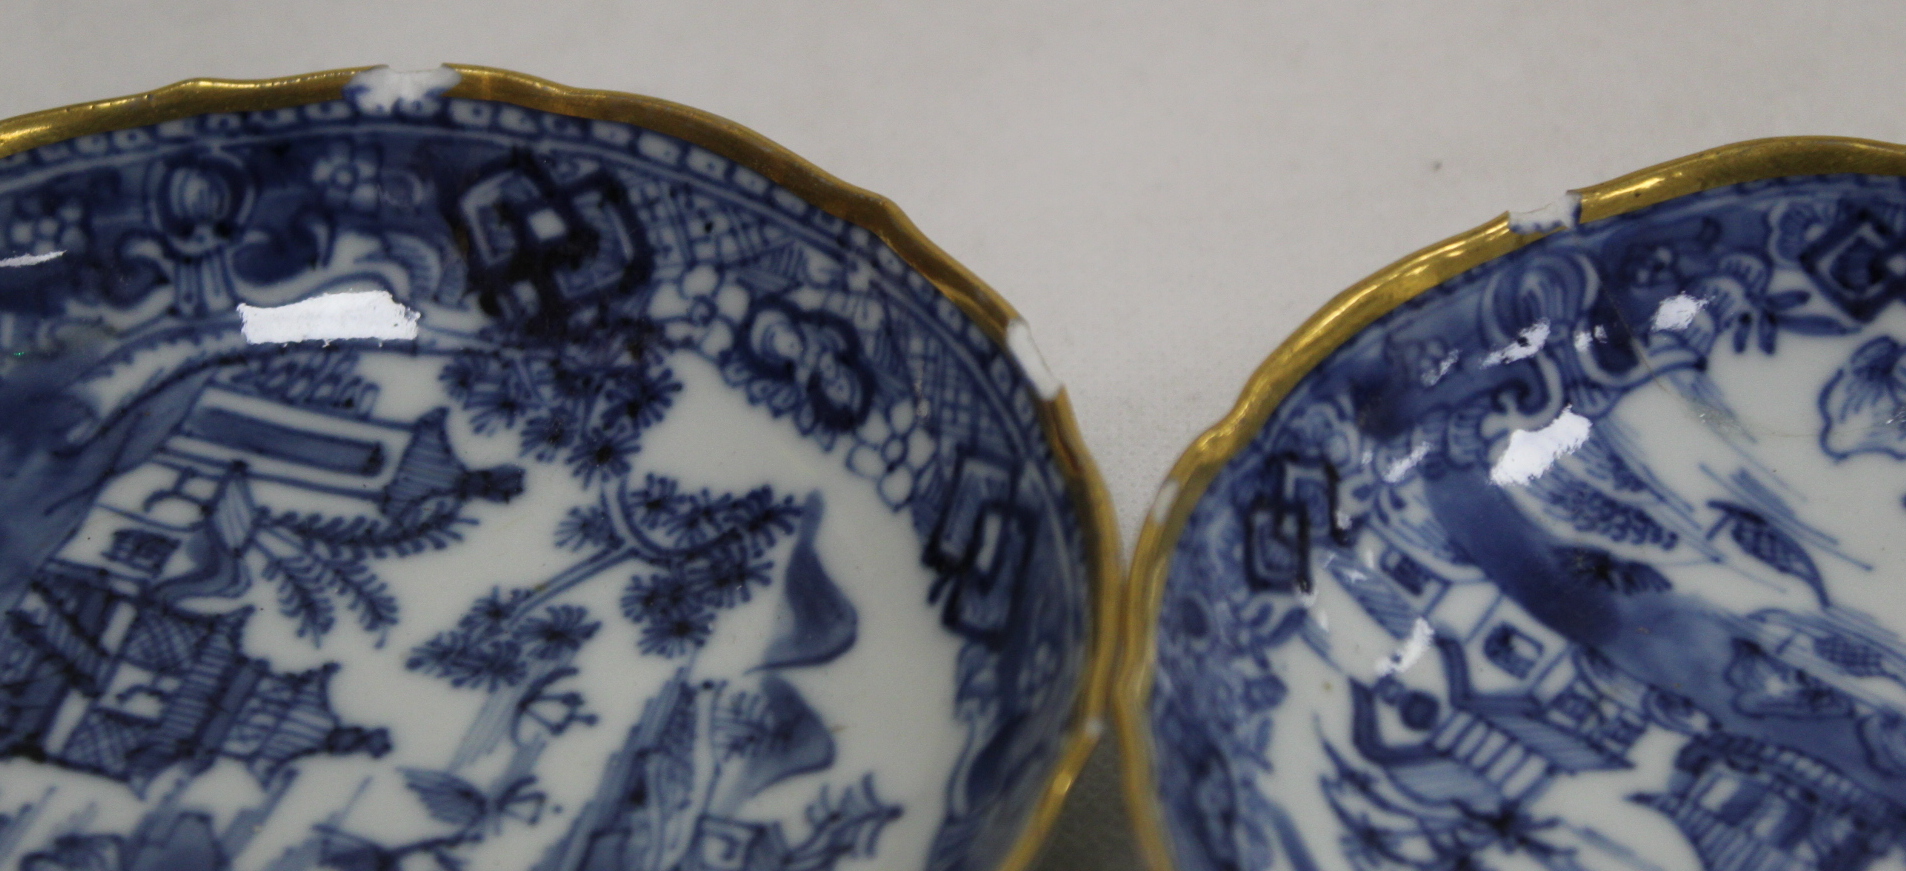 18th century Chinese blue and white porcelain teapot of reeded cylindrical form with entwined - Image 10 of 21